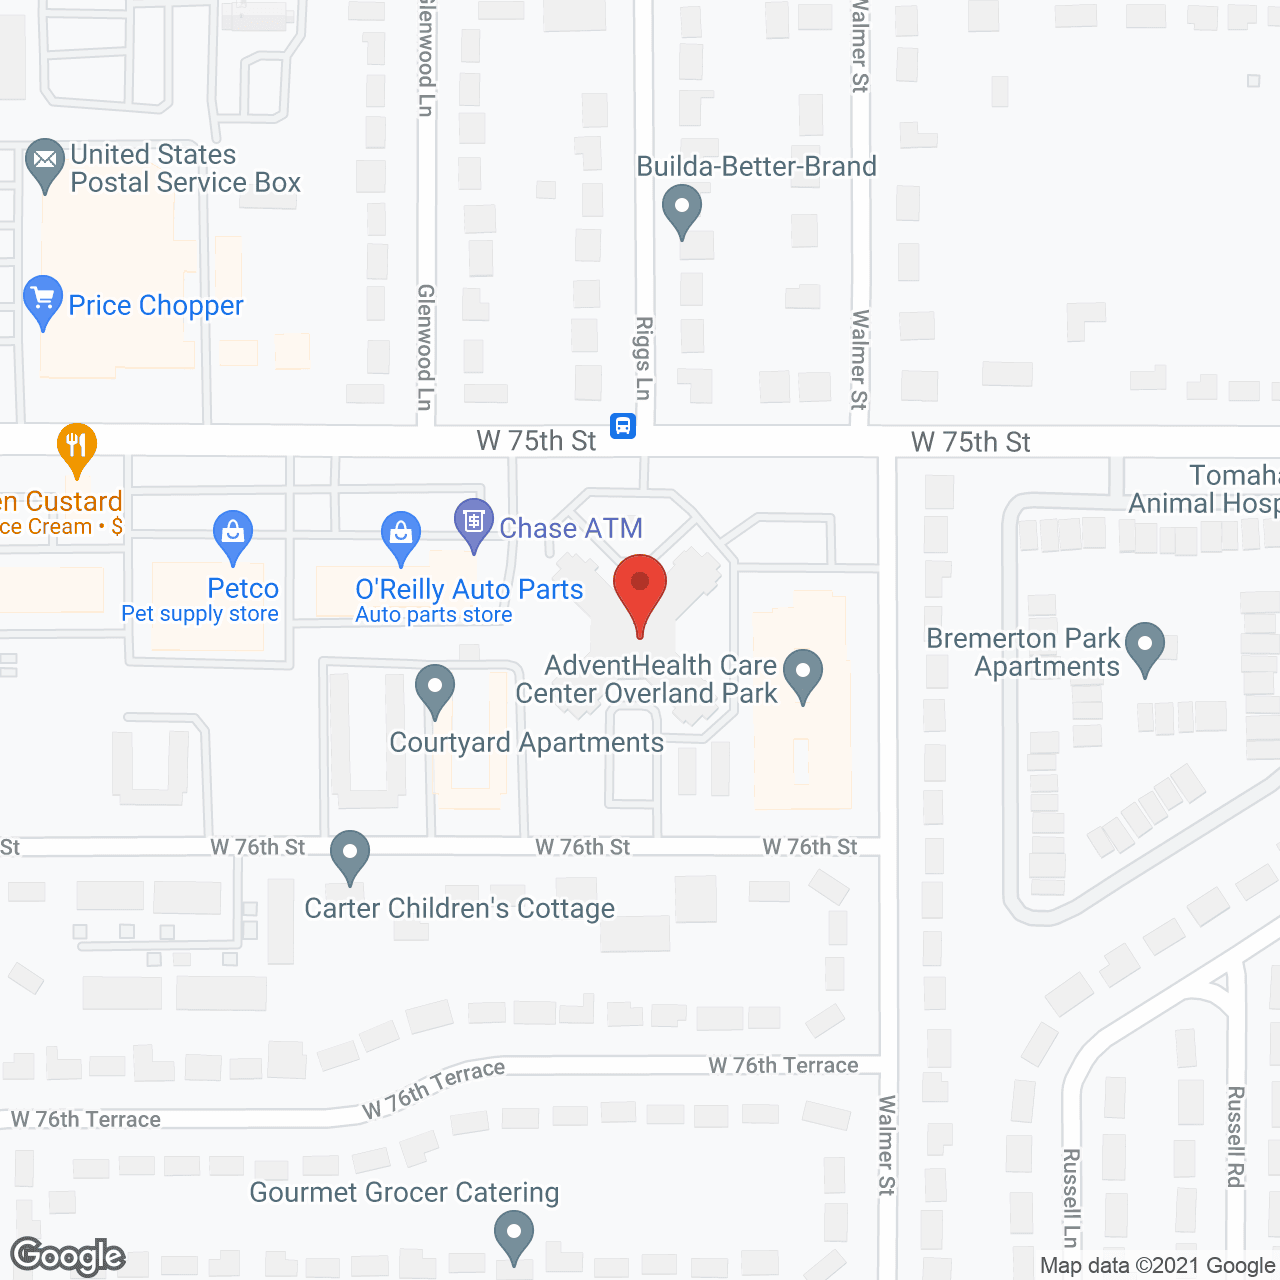 Overland Park Place in google map